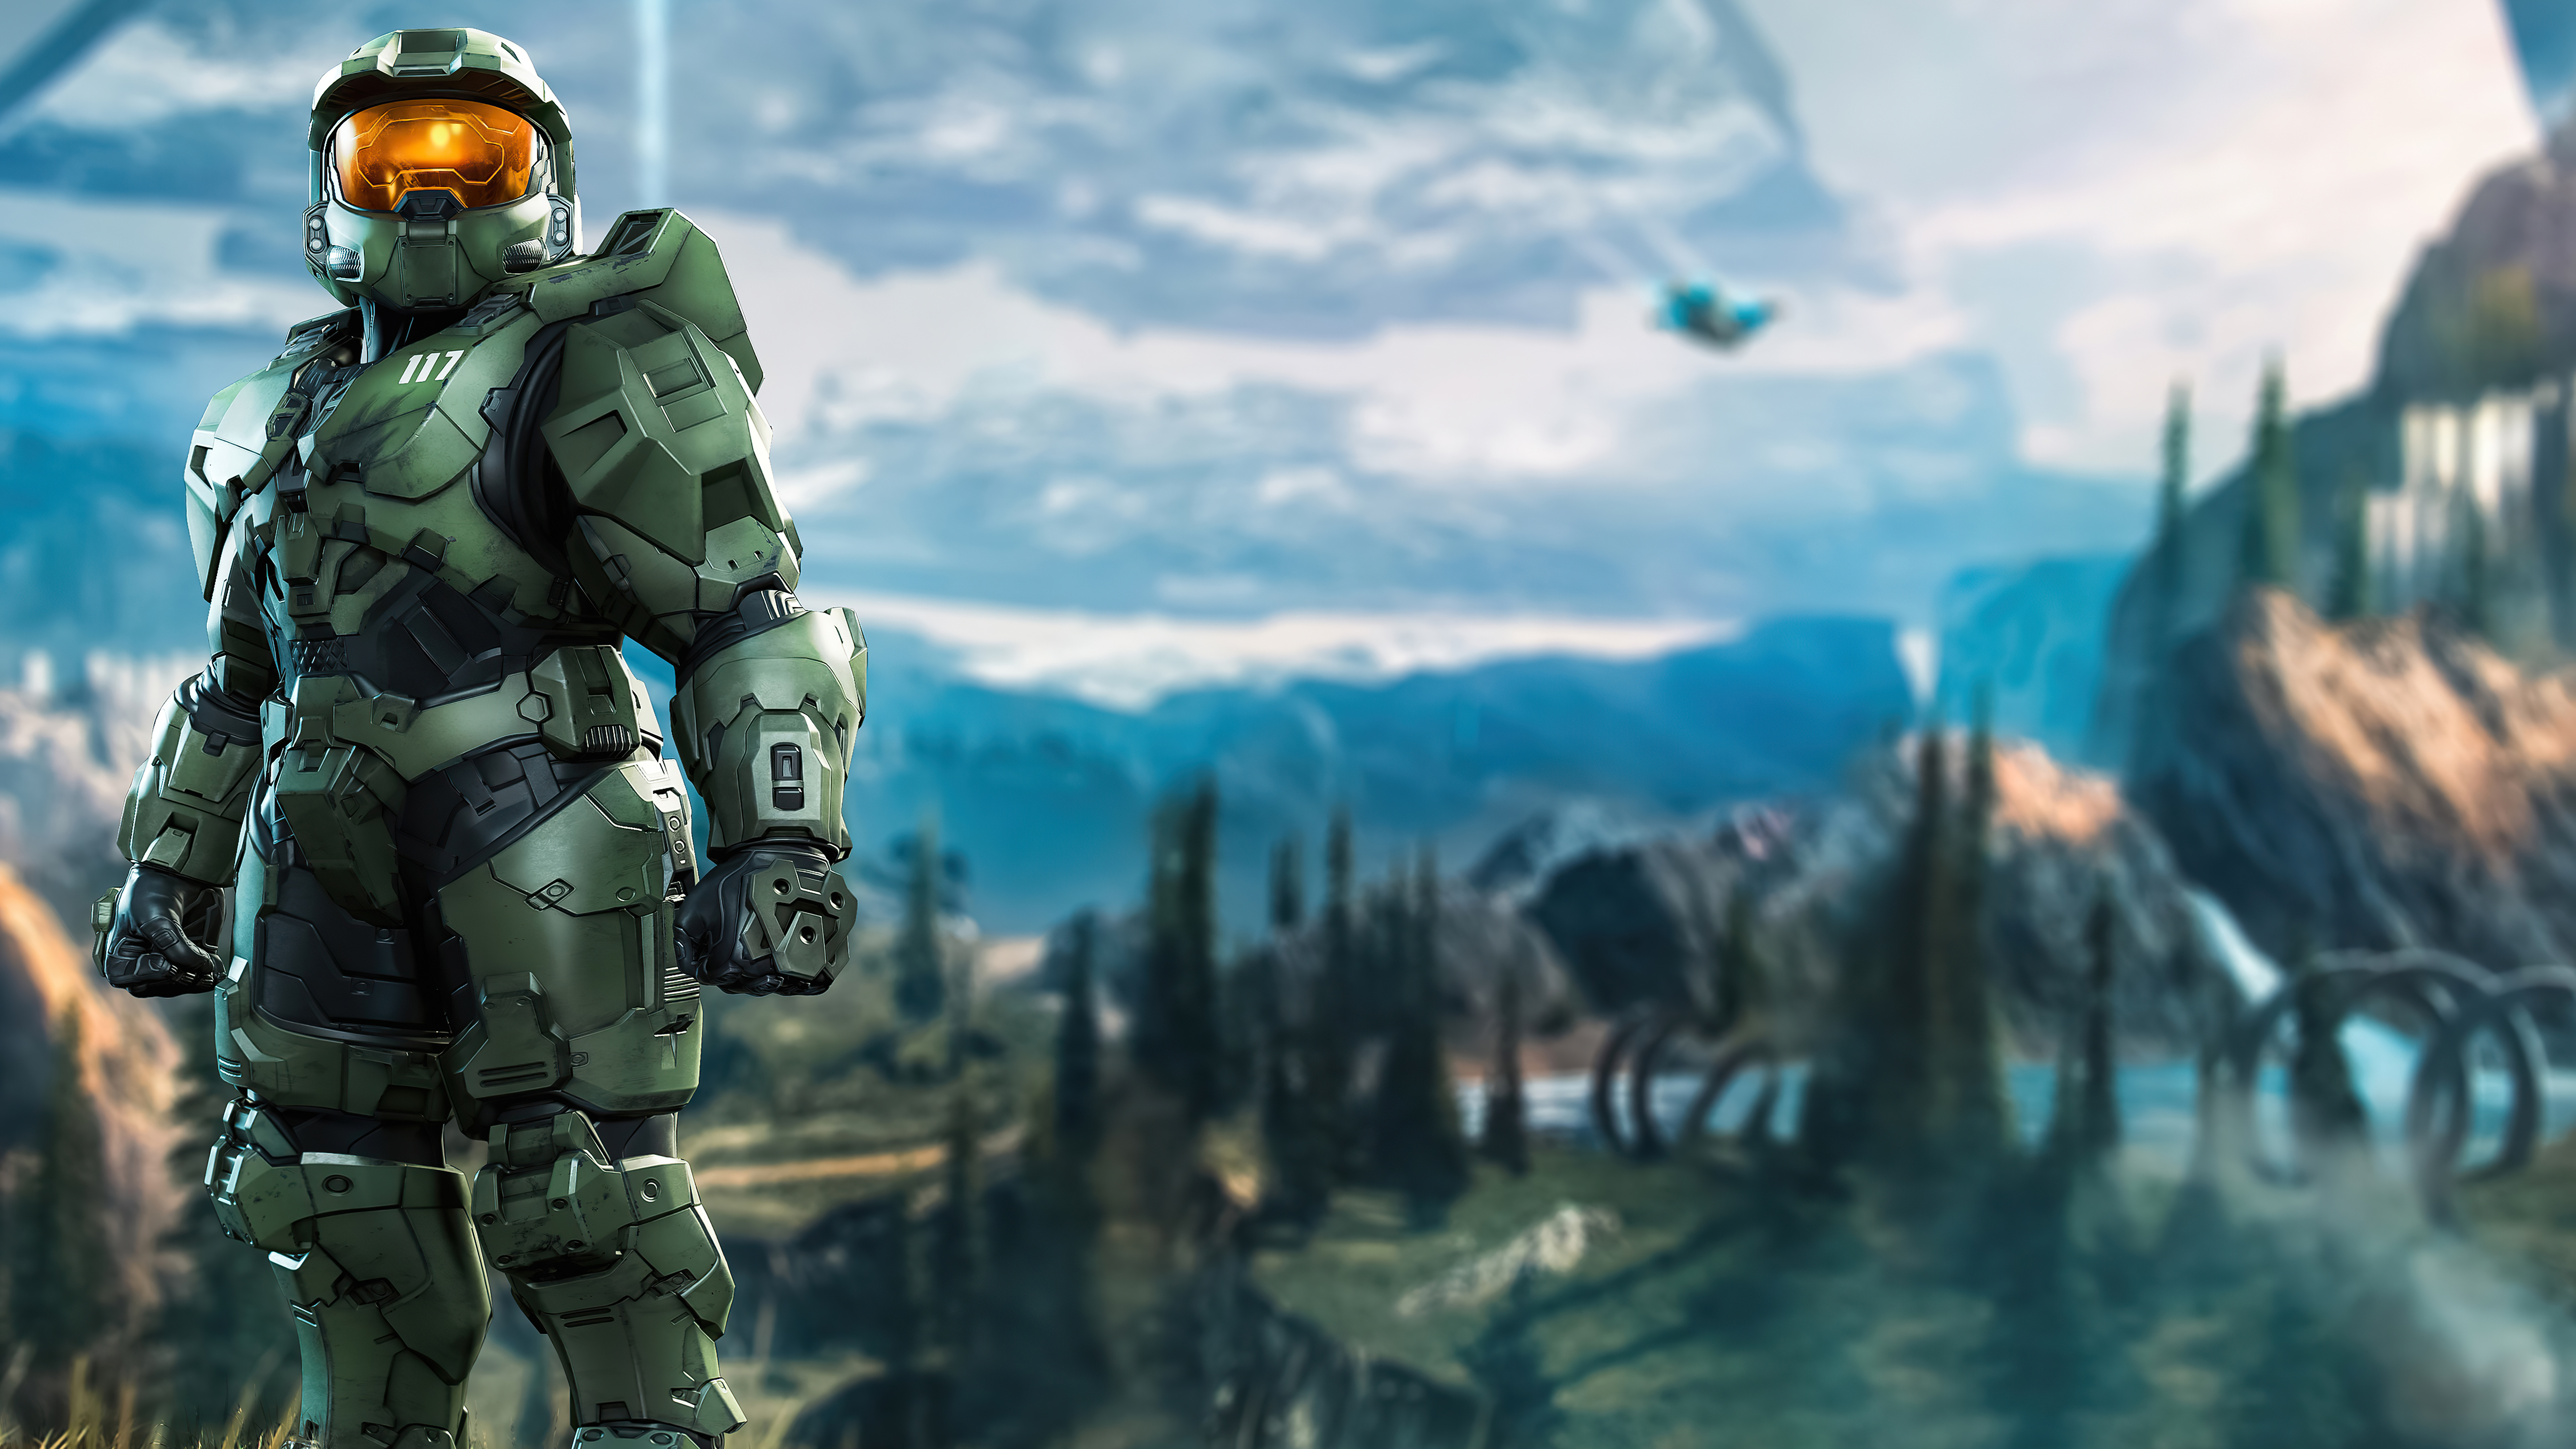 Wallpaper ID 338463  Video Game Halo 5 Guardians Phone Wallpaper Master  Chief 1228x2700 free download